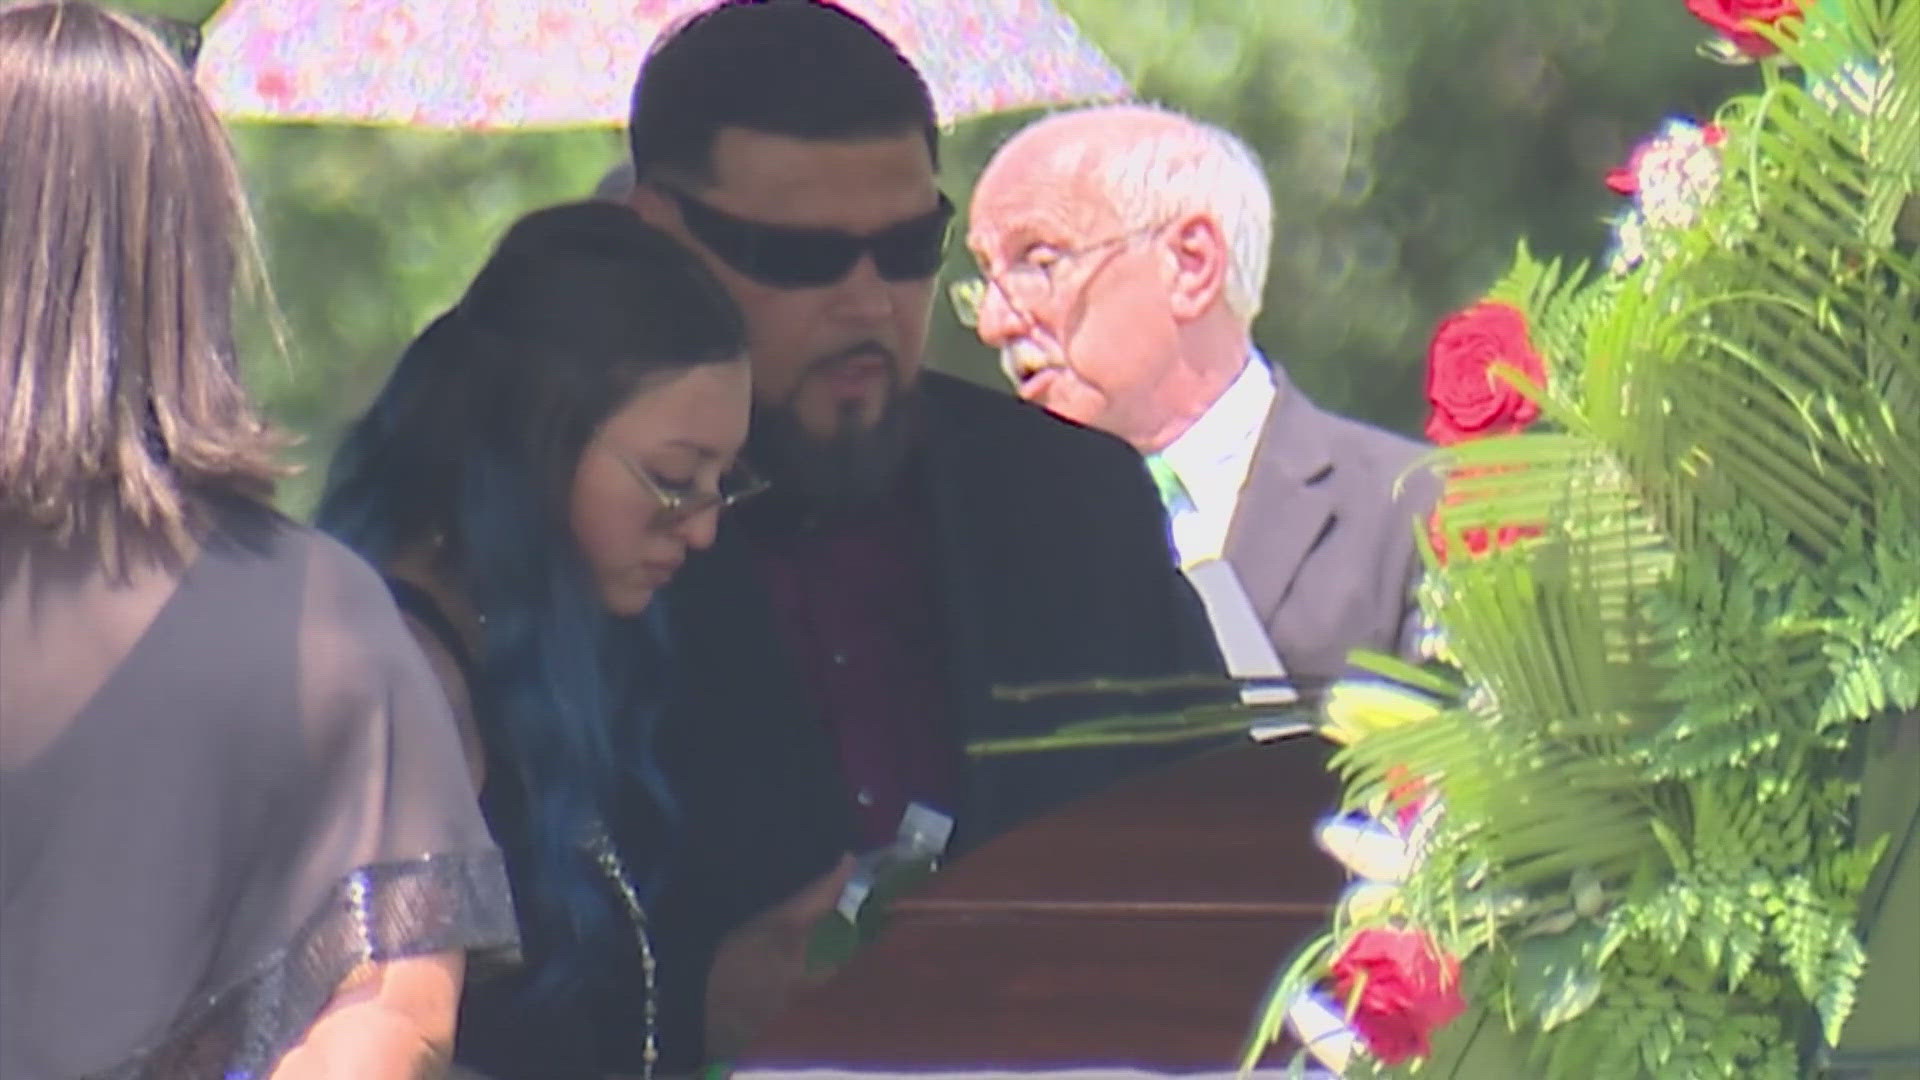 Jocelyn Nungaray, the 12-year-old Houston girl whose death touched the heart and soul of this city, was laid to rest today following a private funeral.